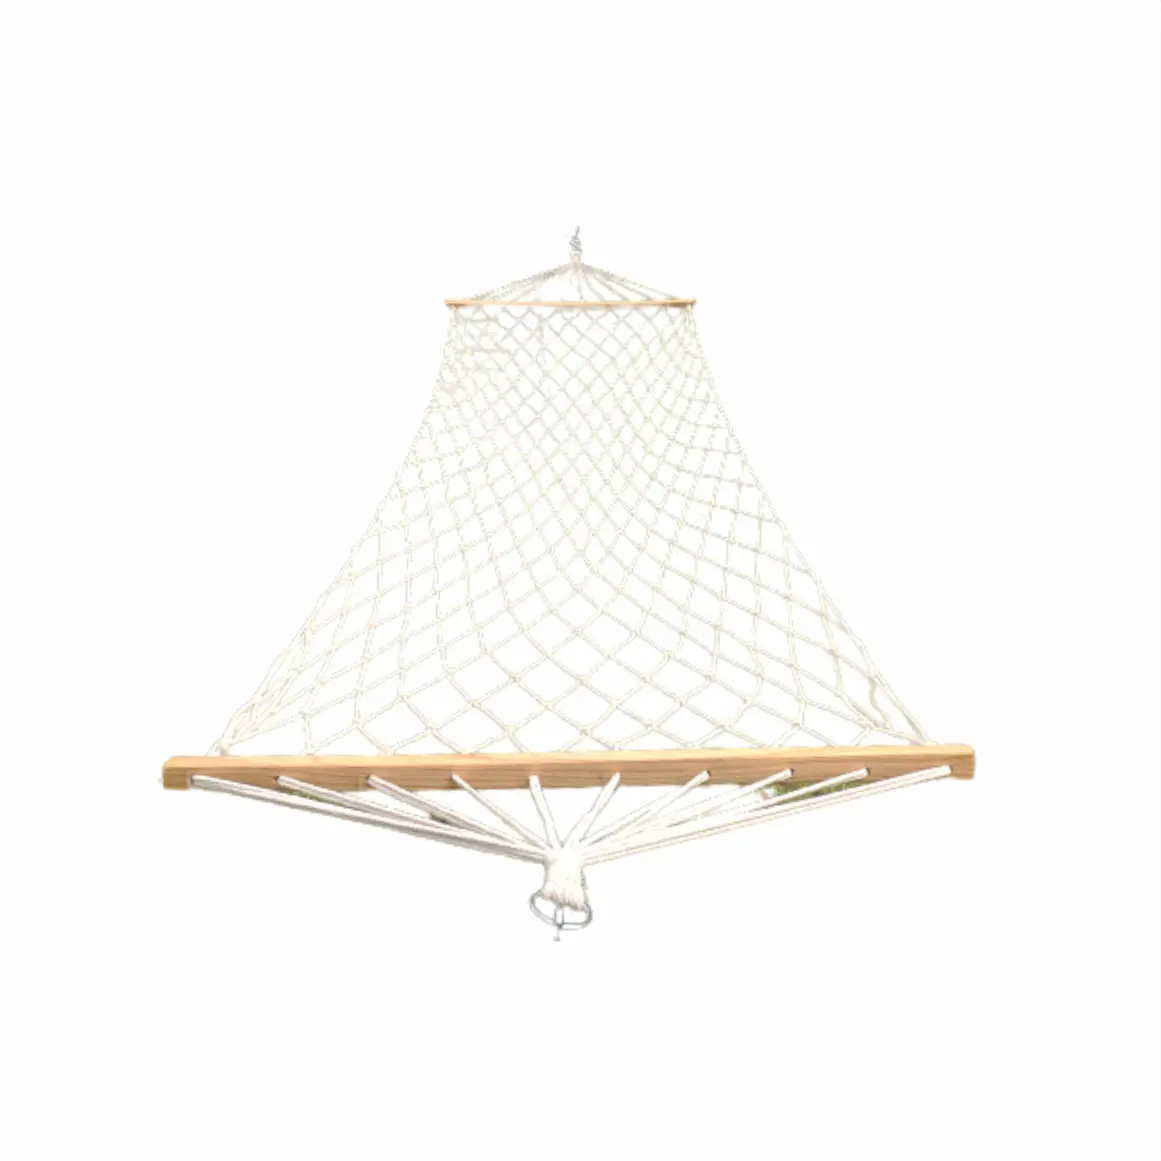 High Grade Net Wholesale Outdoor Portable Camping Swing Cotton Thread Solid Wood Stick Hammock